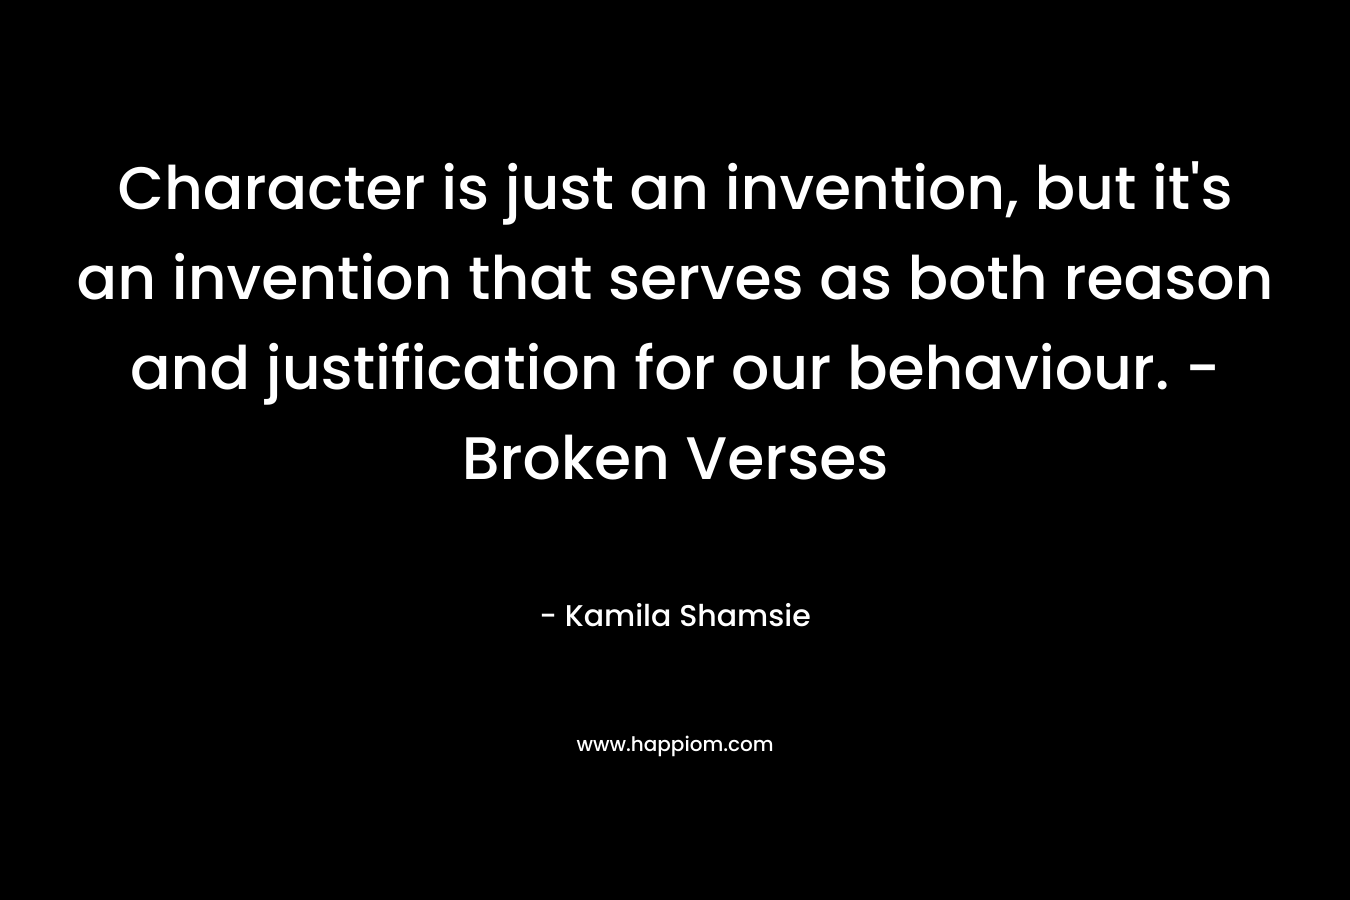 Character is just an invention, but it’s an invention that serves as both reason and justification for our behaviour. – Broken Verses – Kamila Shamsie